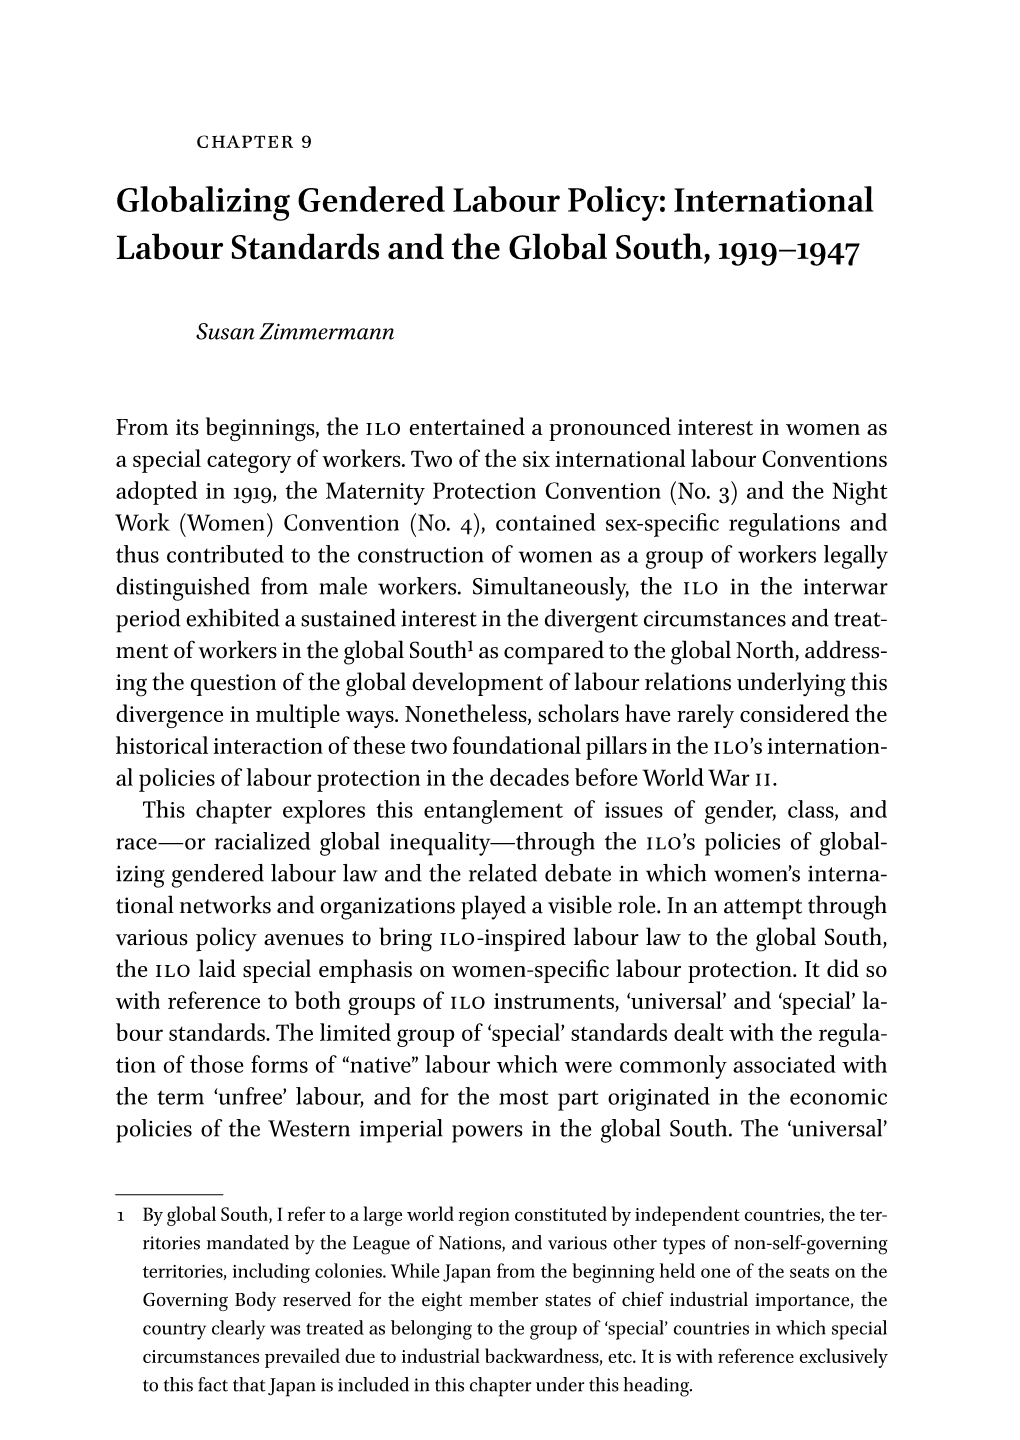 Globalizing Gendered Labour Policy. International Labour